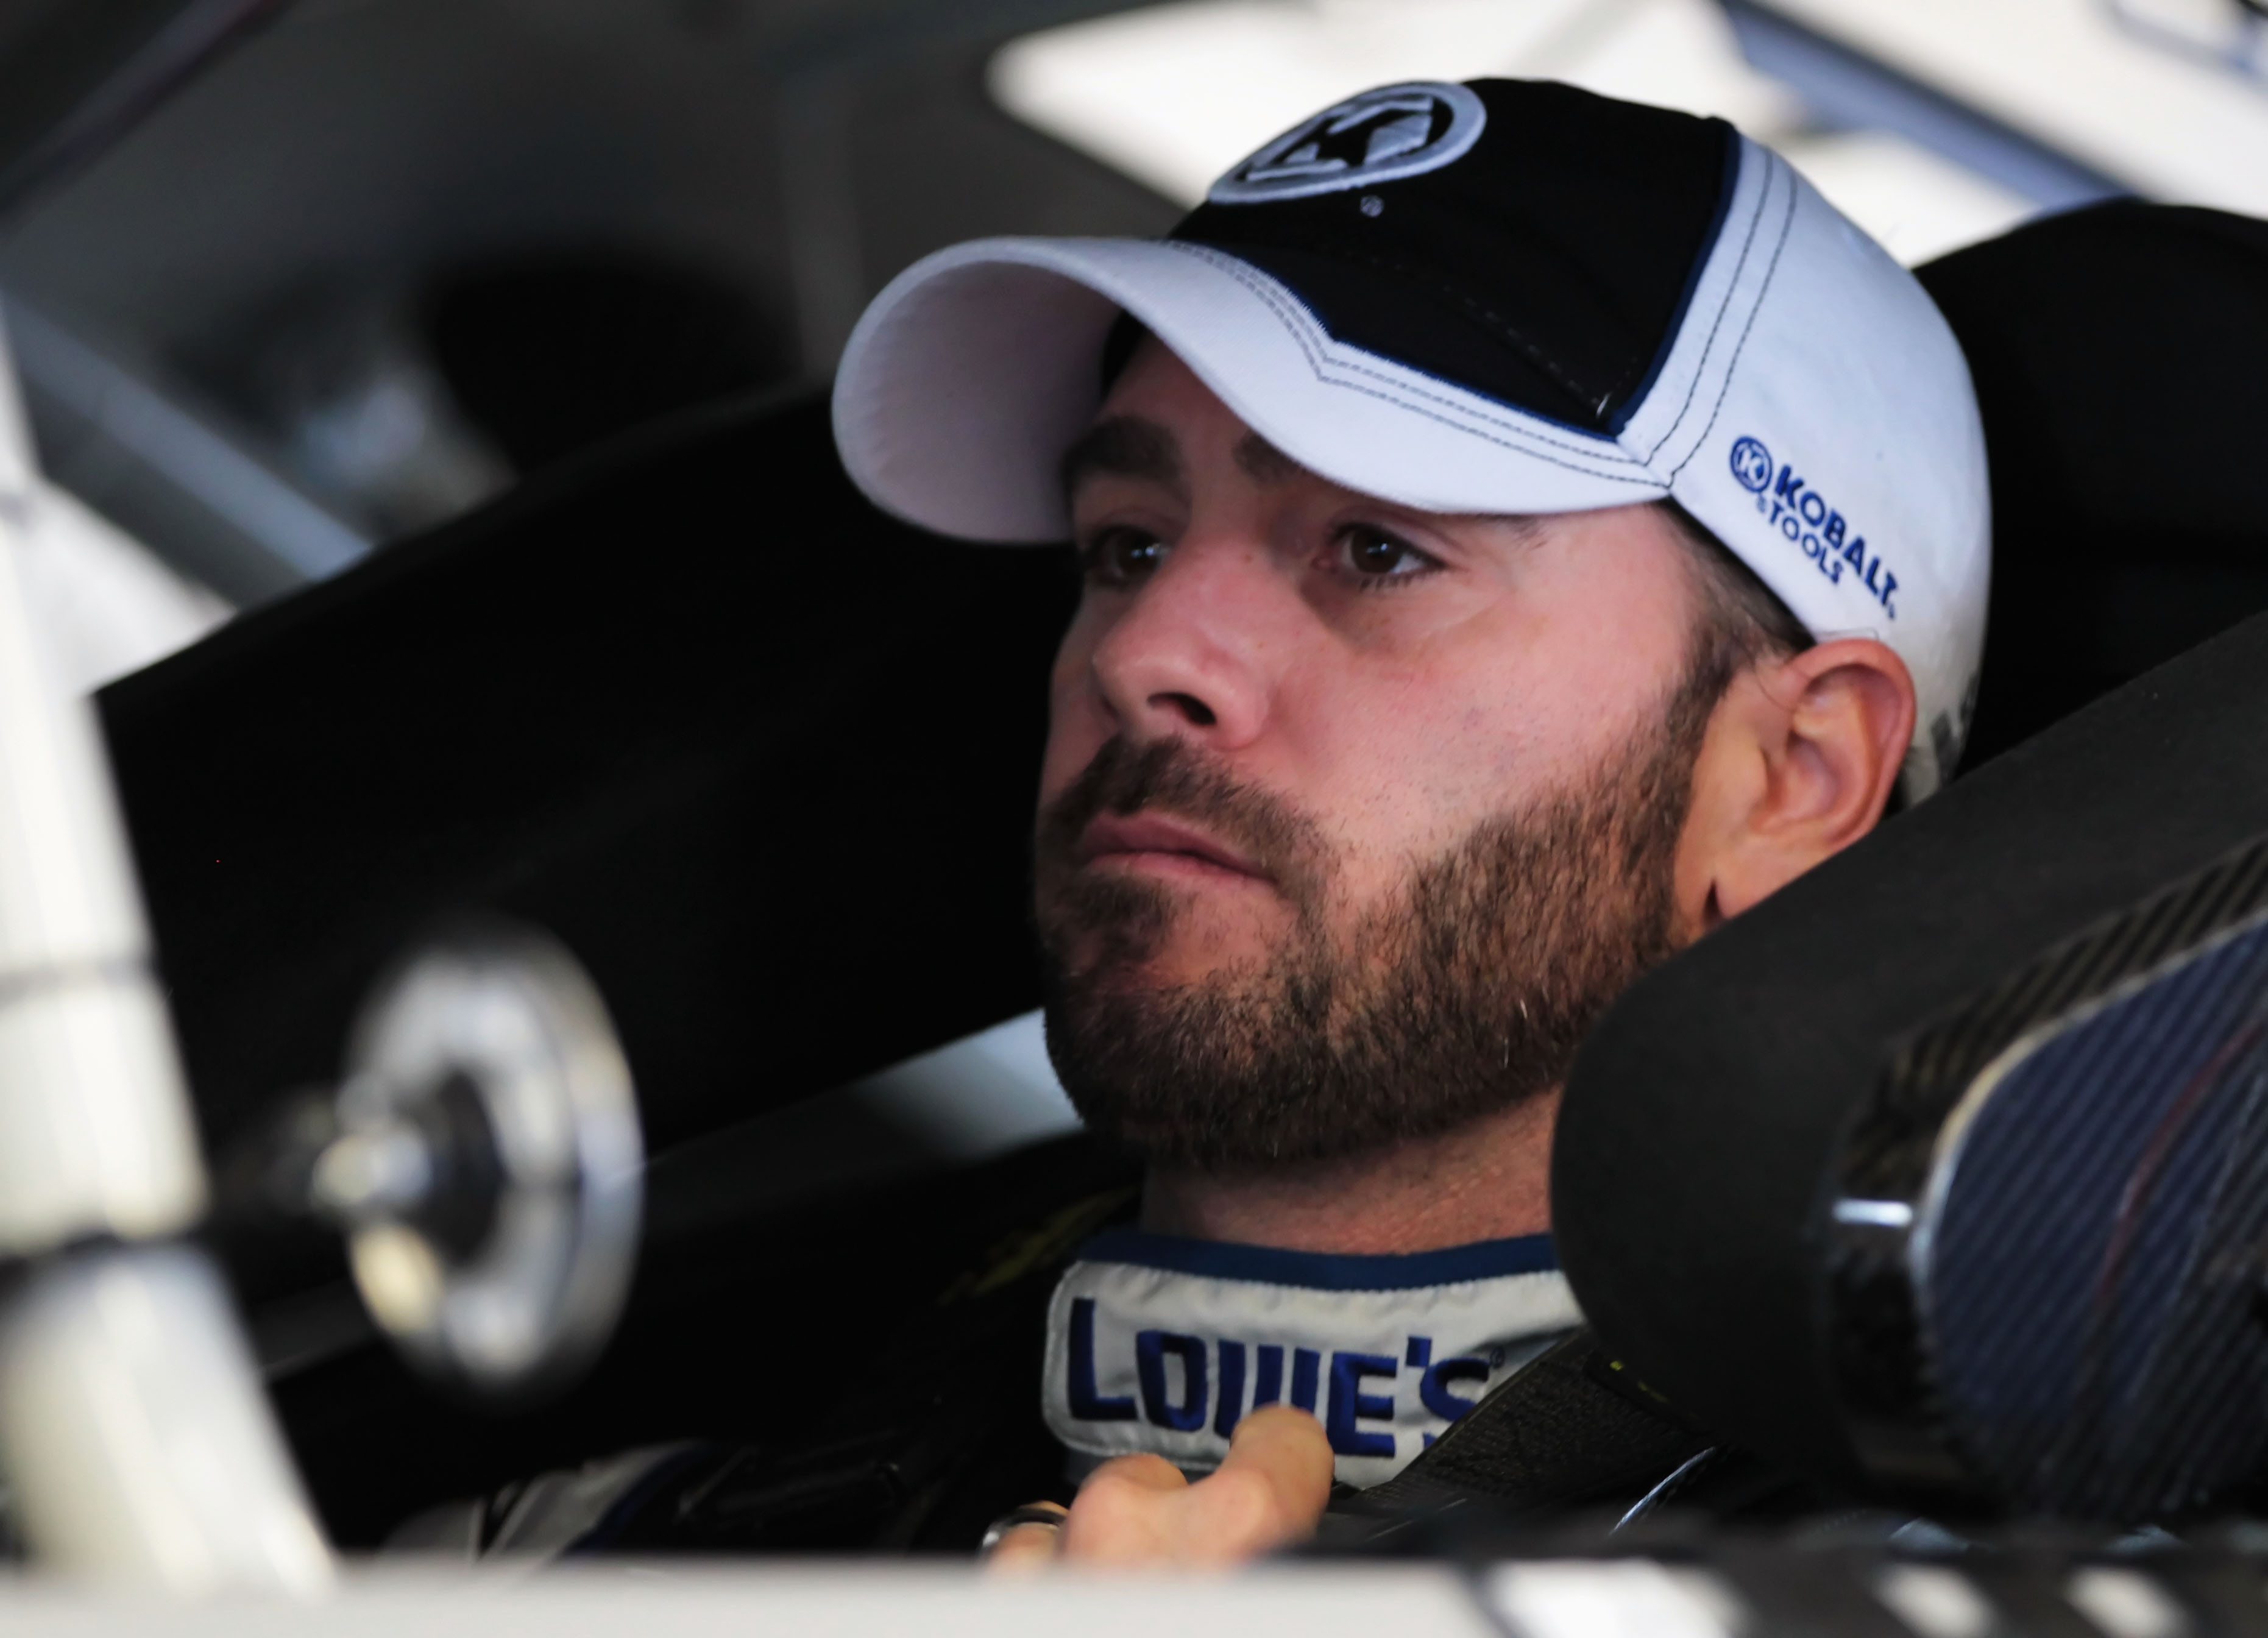 DAYTONA BEACH, FL - FEBRUARY 18:  Jimmie Johnson, driver of the #48 Lowe's Chevrolet, sits in his car in the garage area during practice for the NASCAR Sprint Cup Series Daytona 500 at Daytona International Speedway on February 18, 2011 in Daytona Beach,